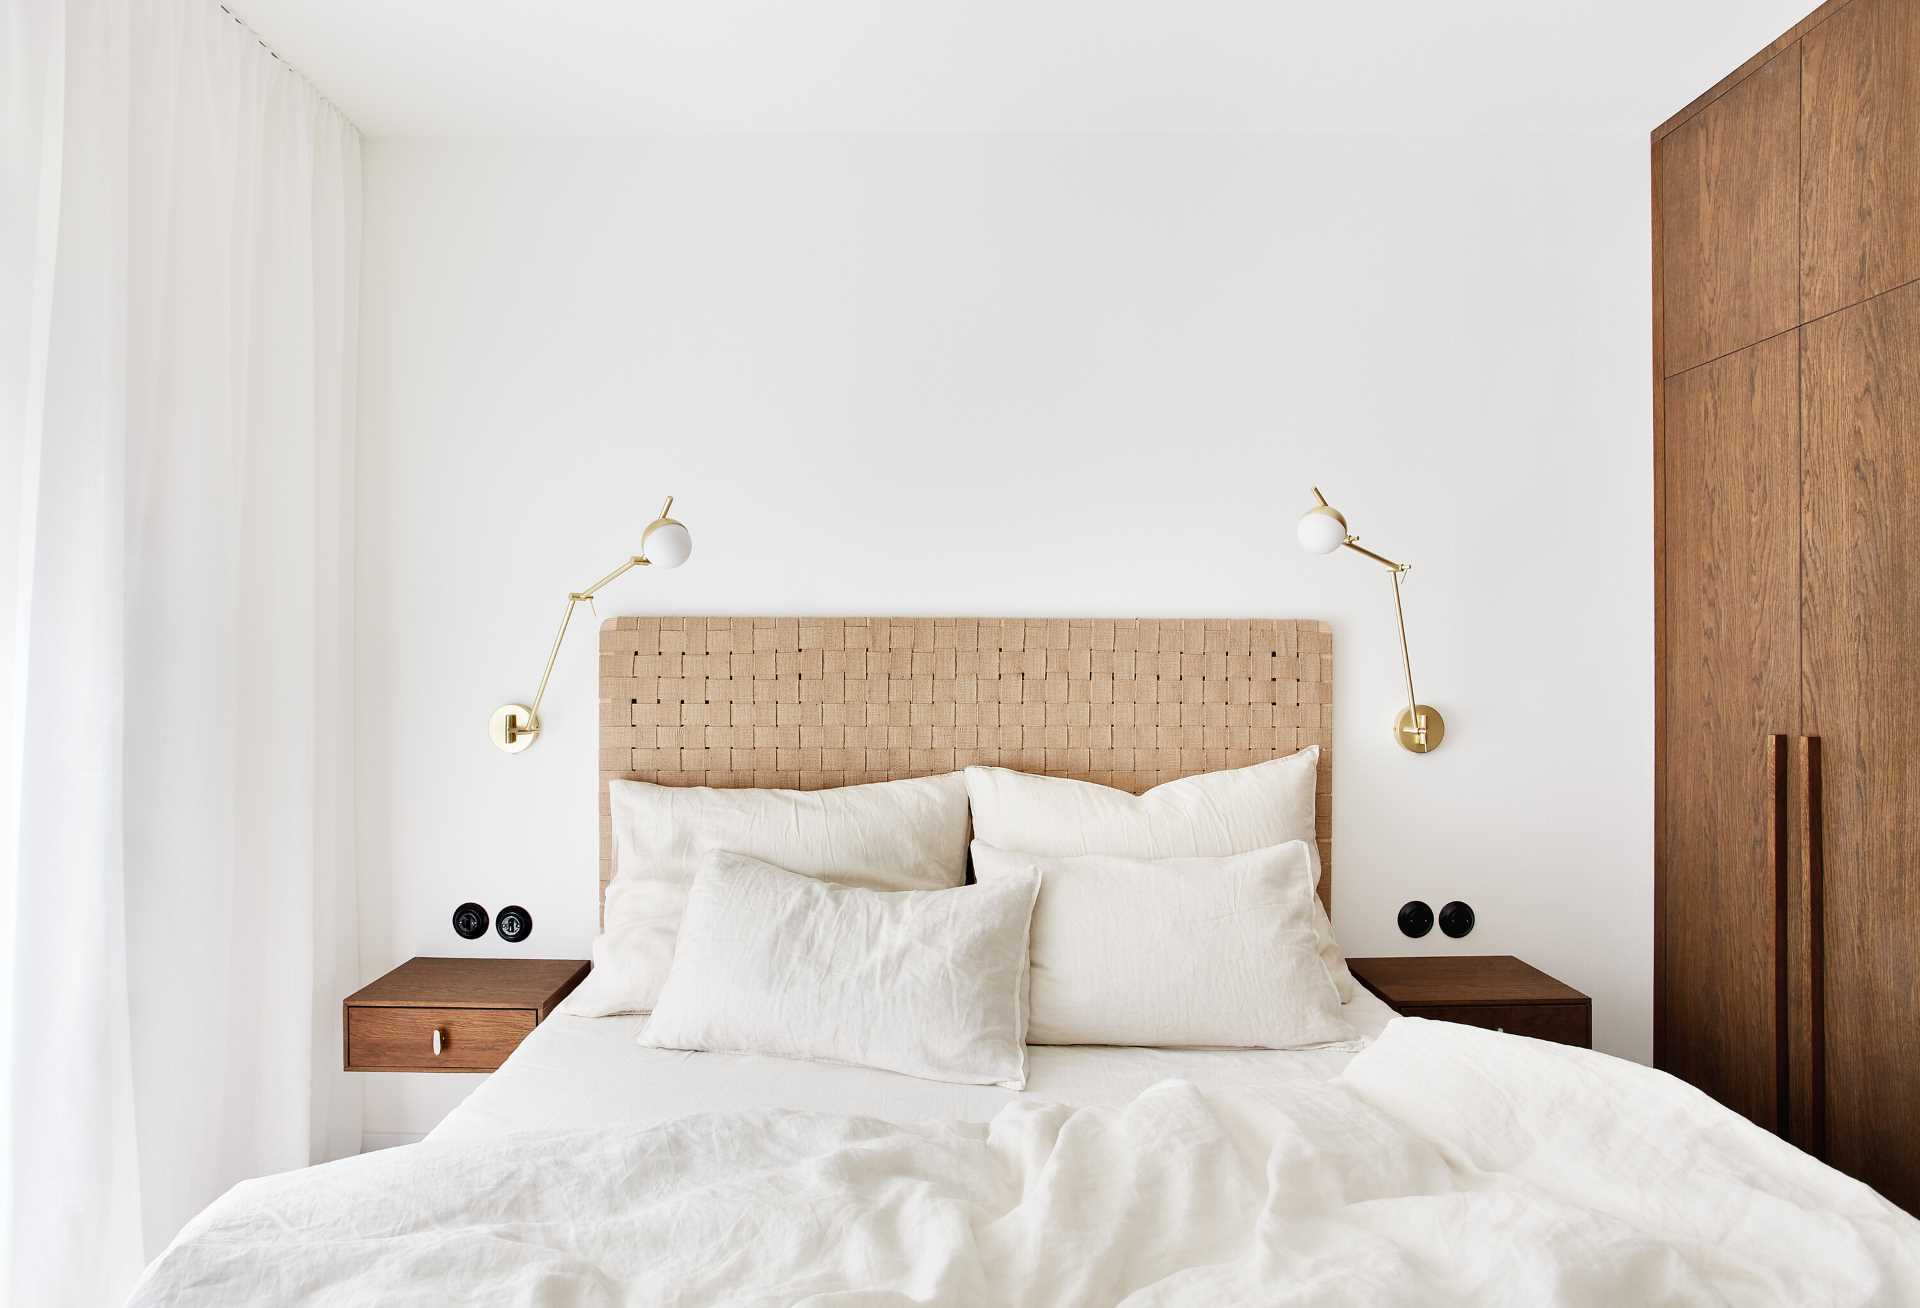 In this bedroom, neutral colors and natural materials create a calm atmosphere.